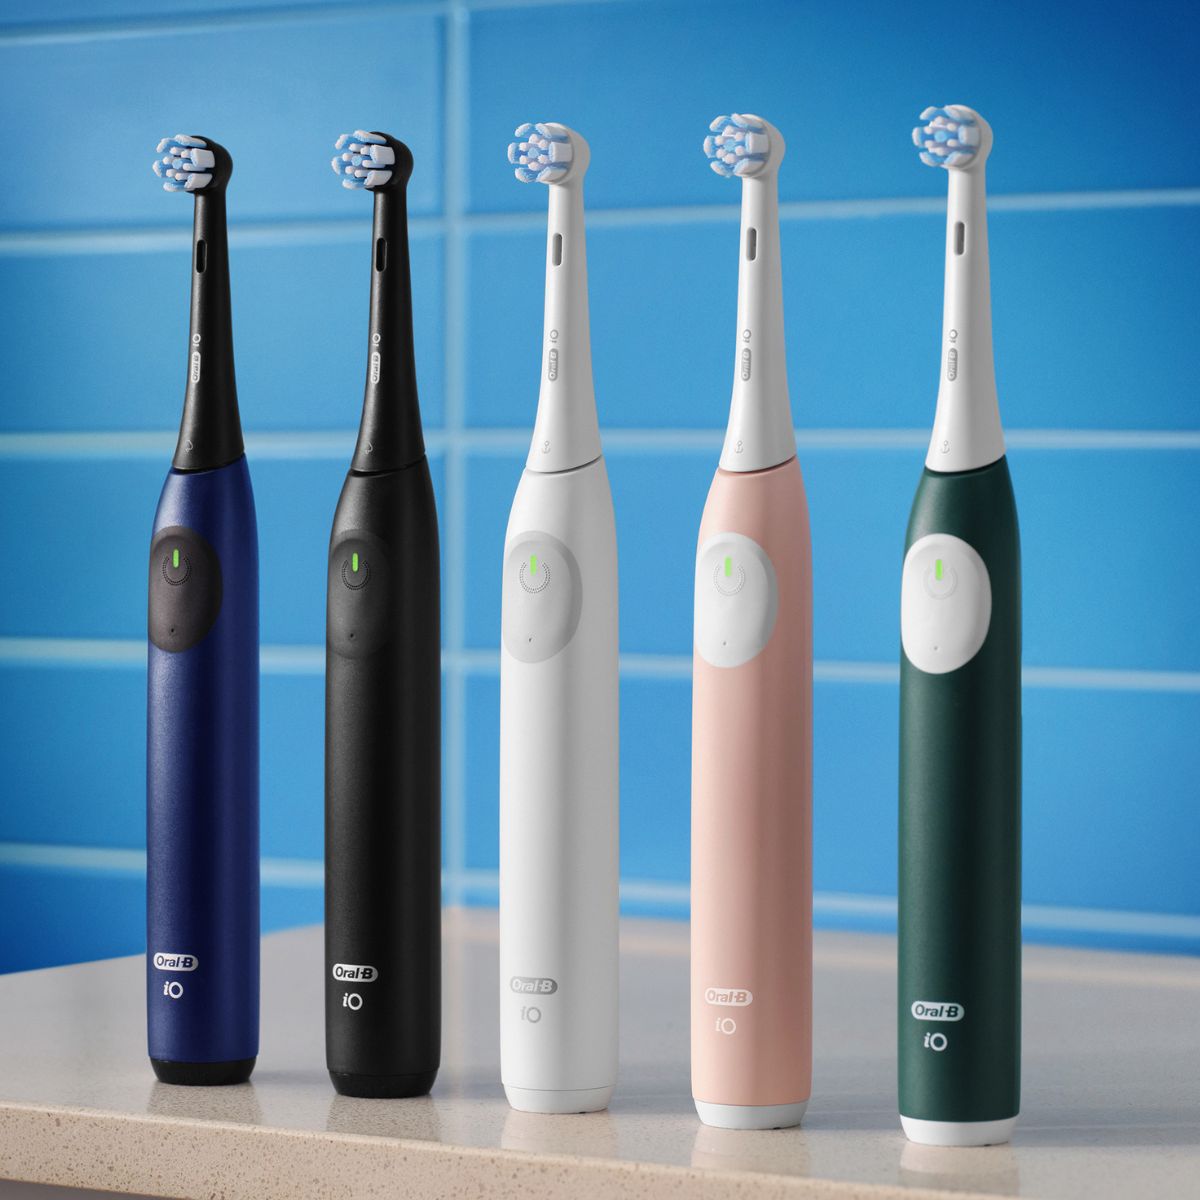 Oral-B iO 2 Series handles and the 5 different color options it comes in.